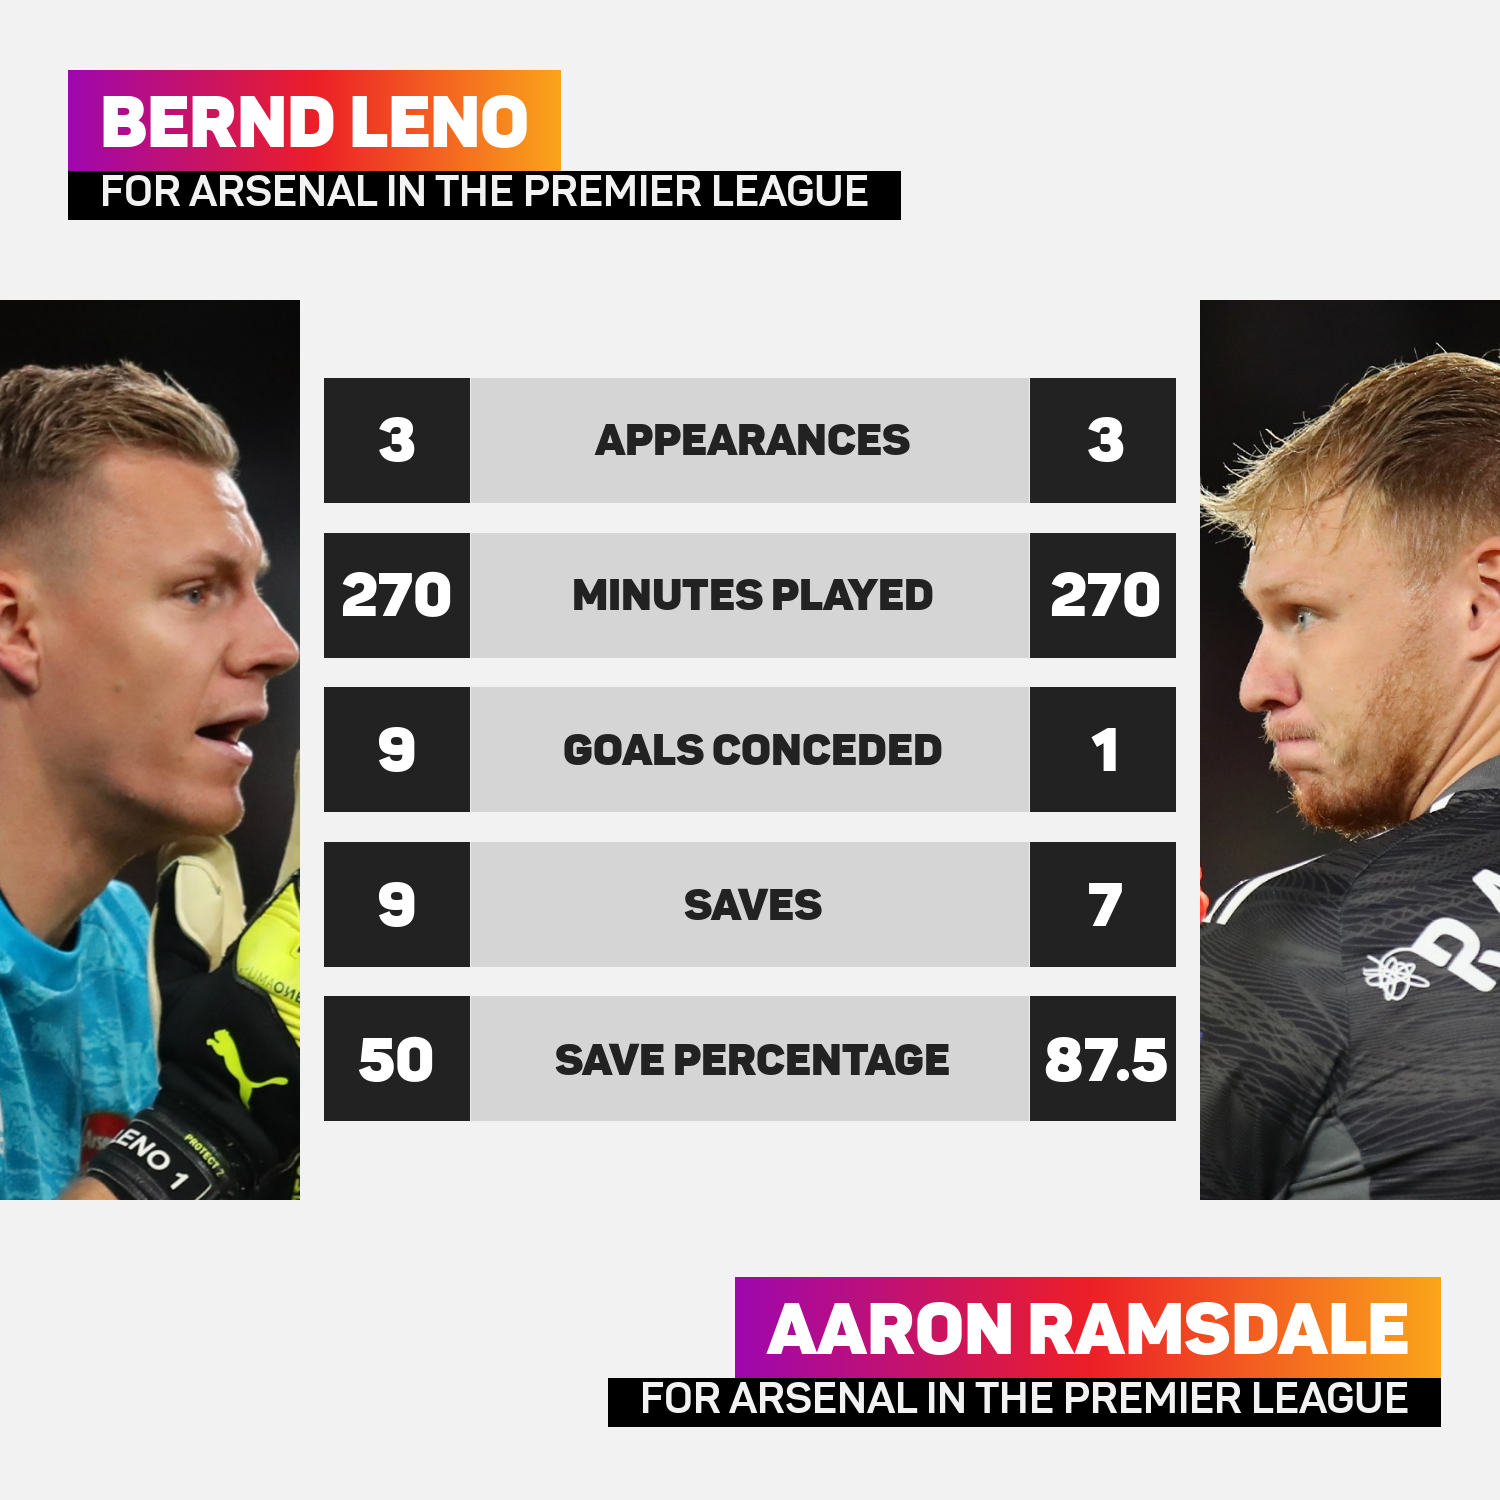 Aaron Ramsdale has a superior record than Bernd Leno this season